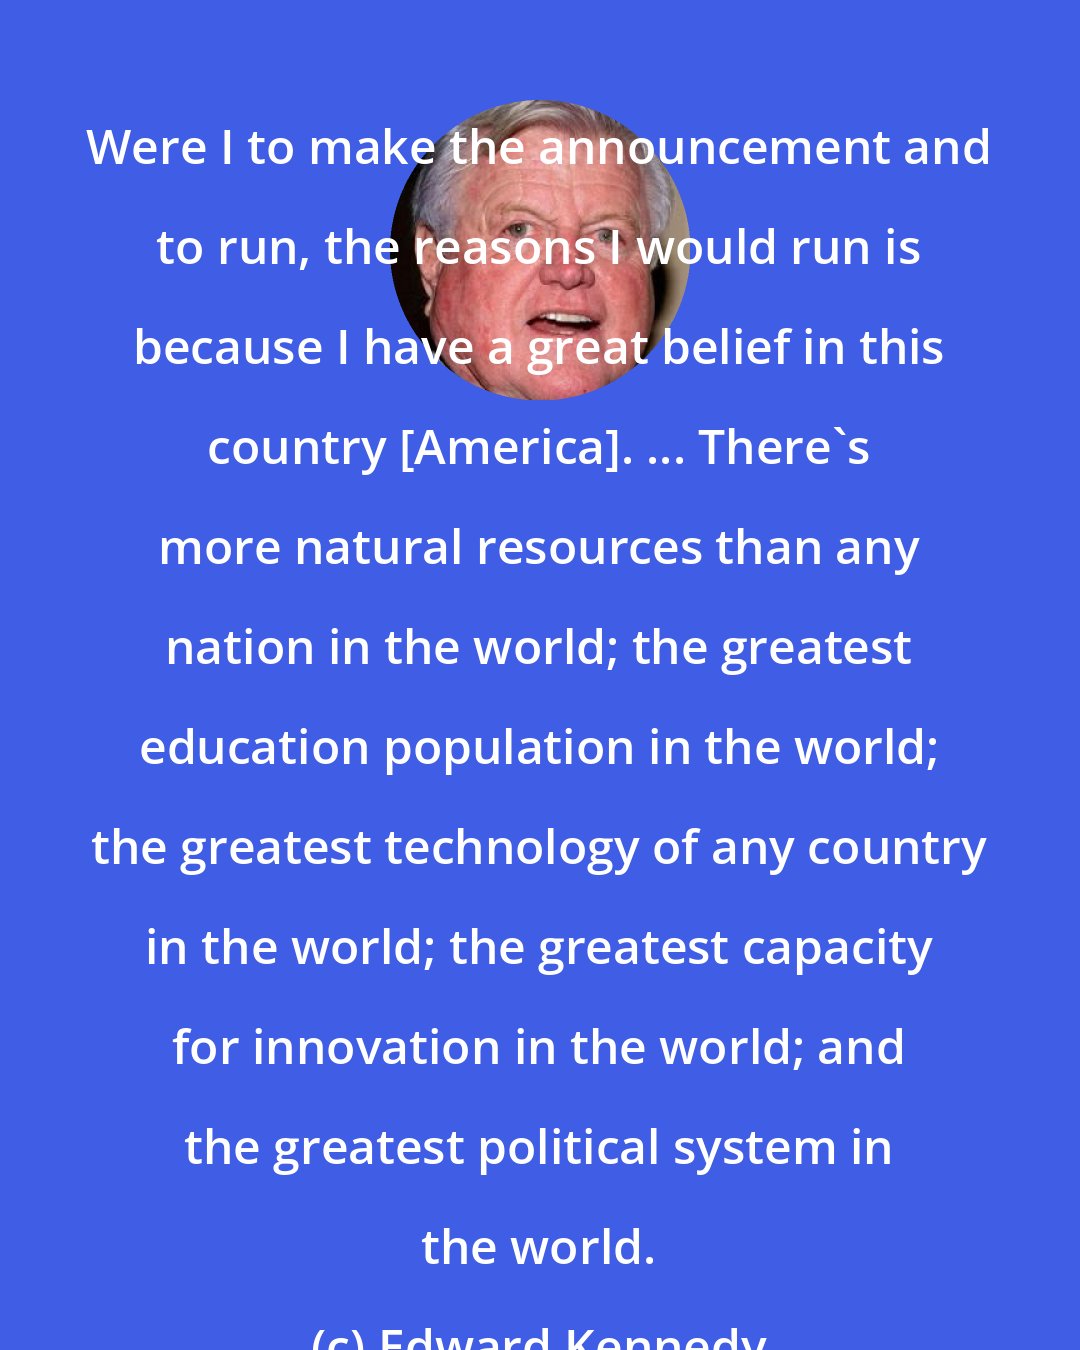 Edward Kennedy: Were I to make the announcement and to run, the reasons I would run is because I have a great belief in this country [America]. ... There's more natural resources than any nation in the world; the greatest education population in the world; the greatest technology of any country in the world; the greatest capacity for innovation in the world; and the greatest political system in the world.